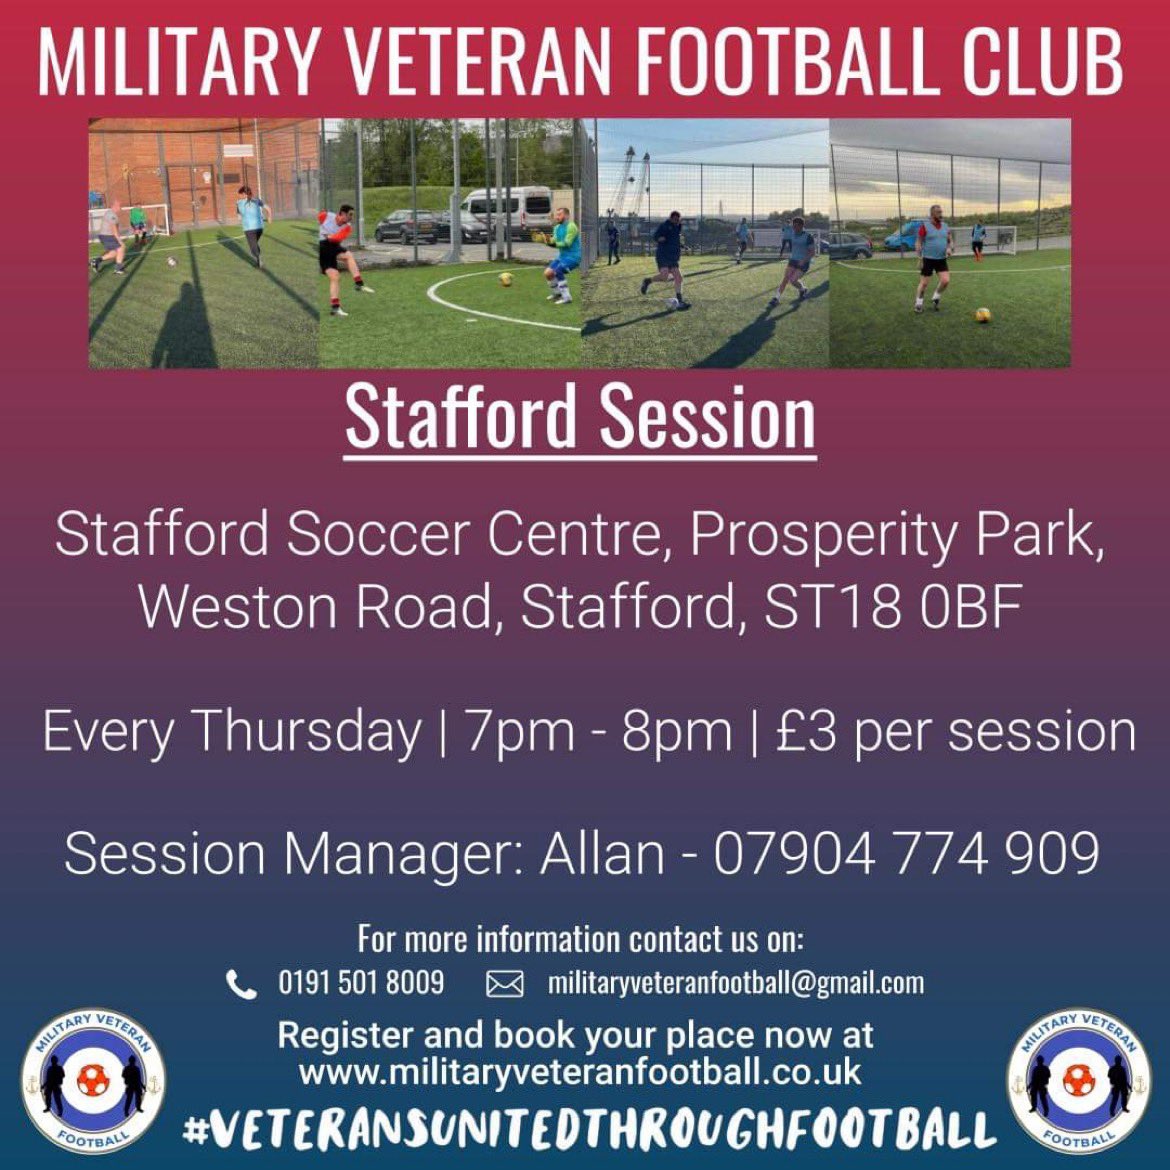 Evening @Staffordshirehr i am in the process of trying to raise awareness of the Military Veterans Football Club. Any military veteran or member of the armed forces can come along for a kick about, sessions are Thursday at 7pm #staffordshirehour